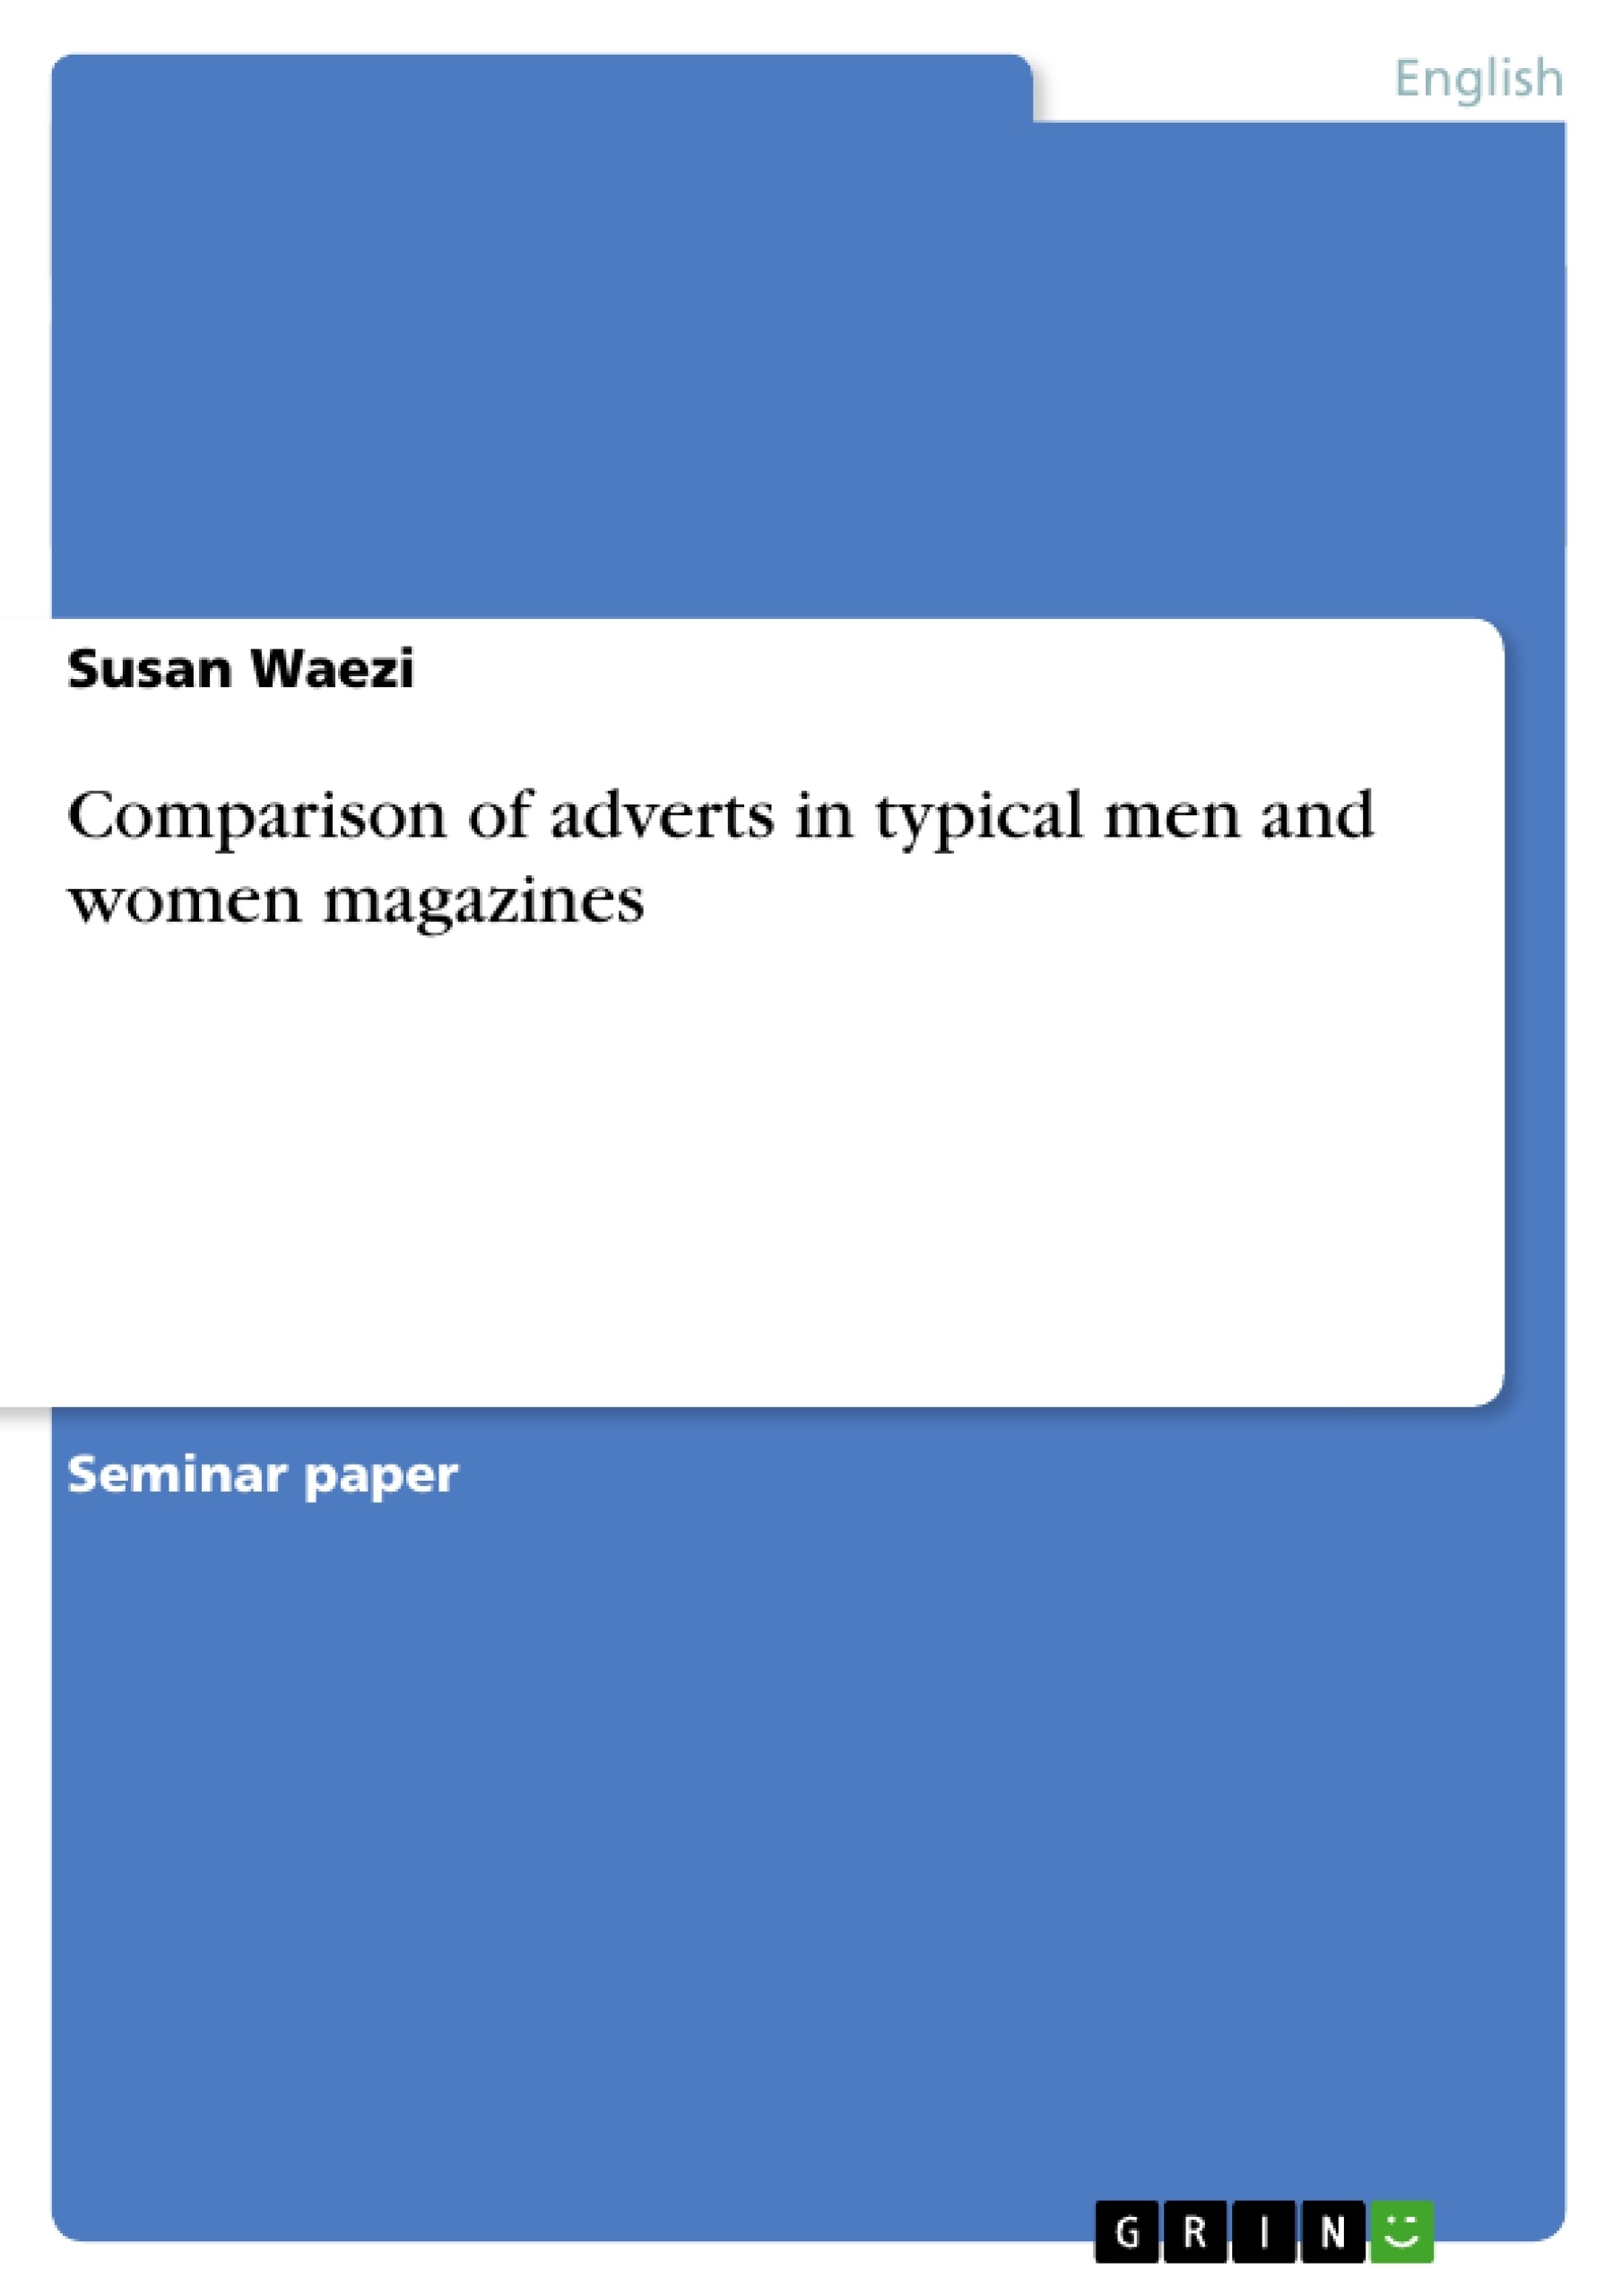 Title: Comparison of adverts in typical men and women magazines